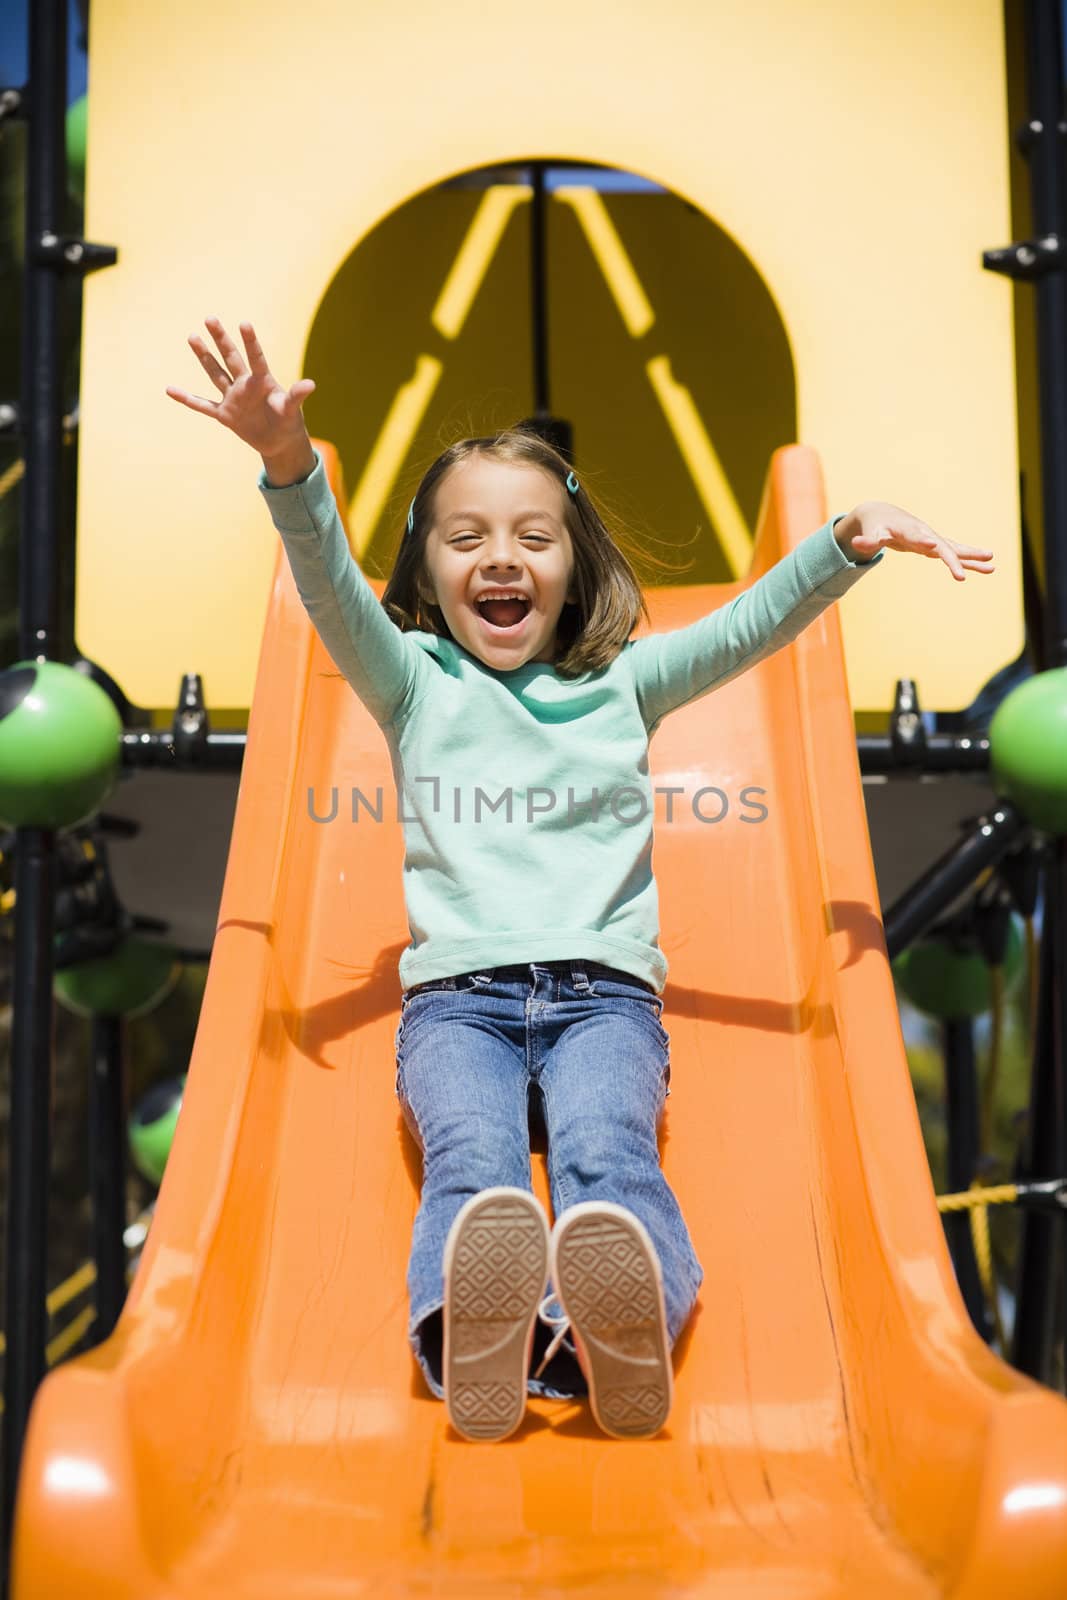 Smiling Young Girl in Park on a Slide